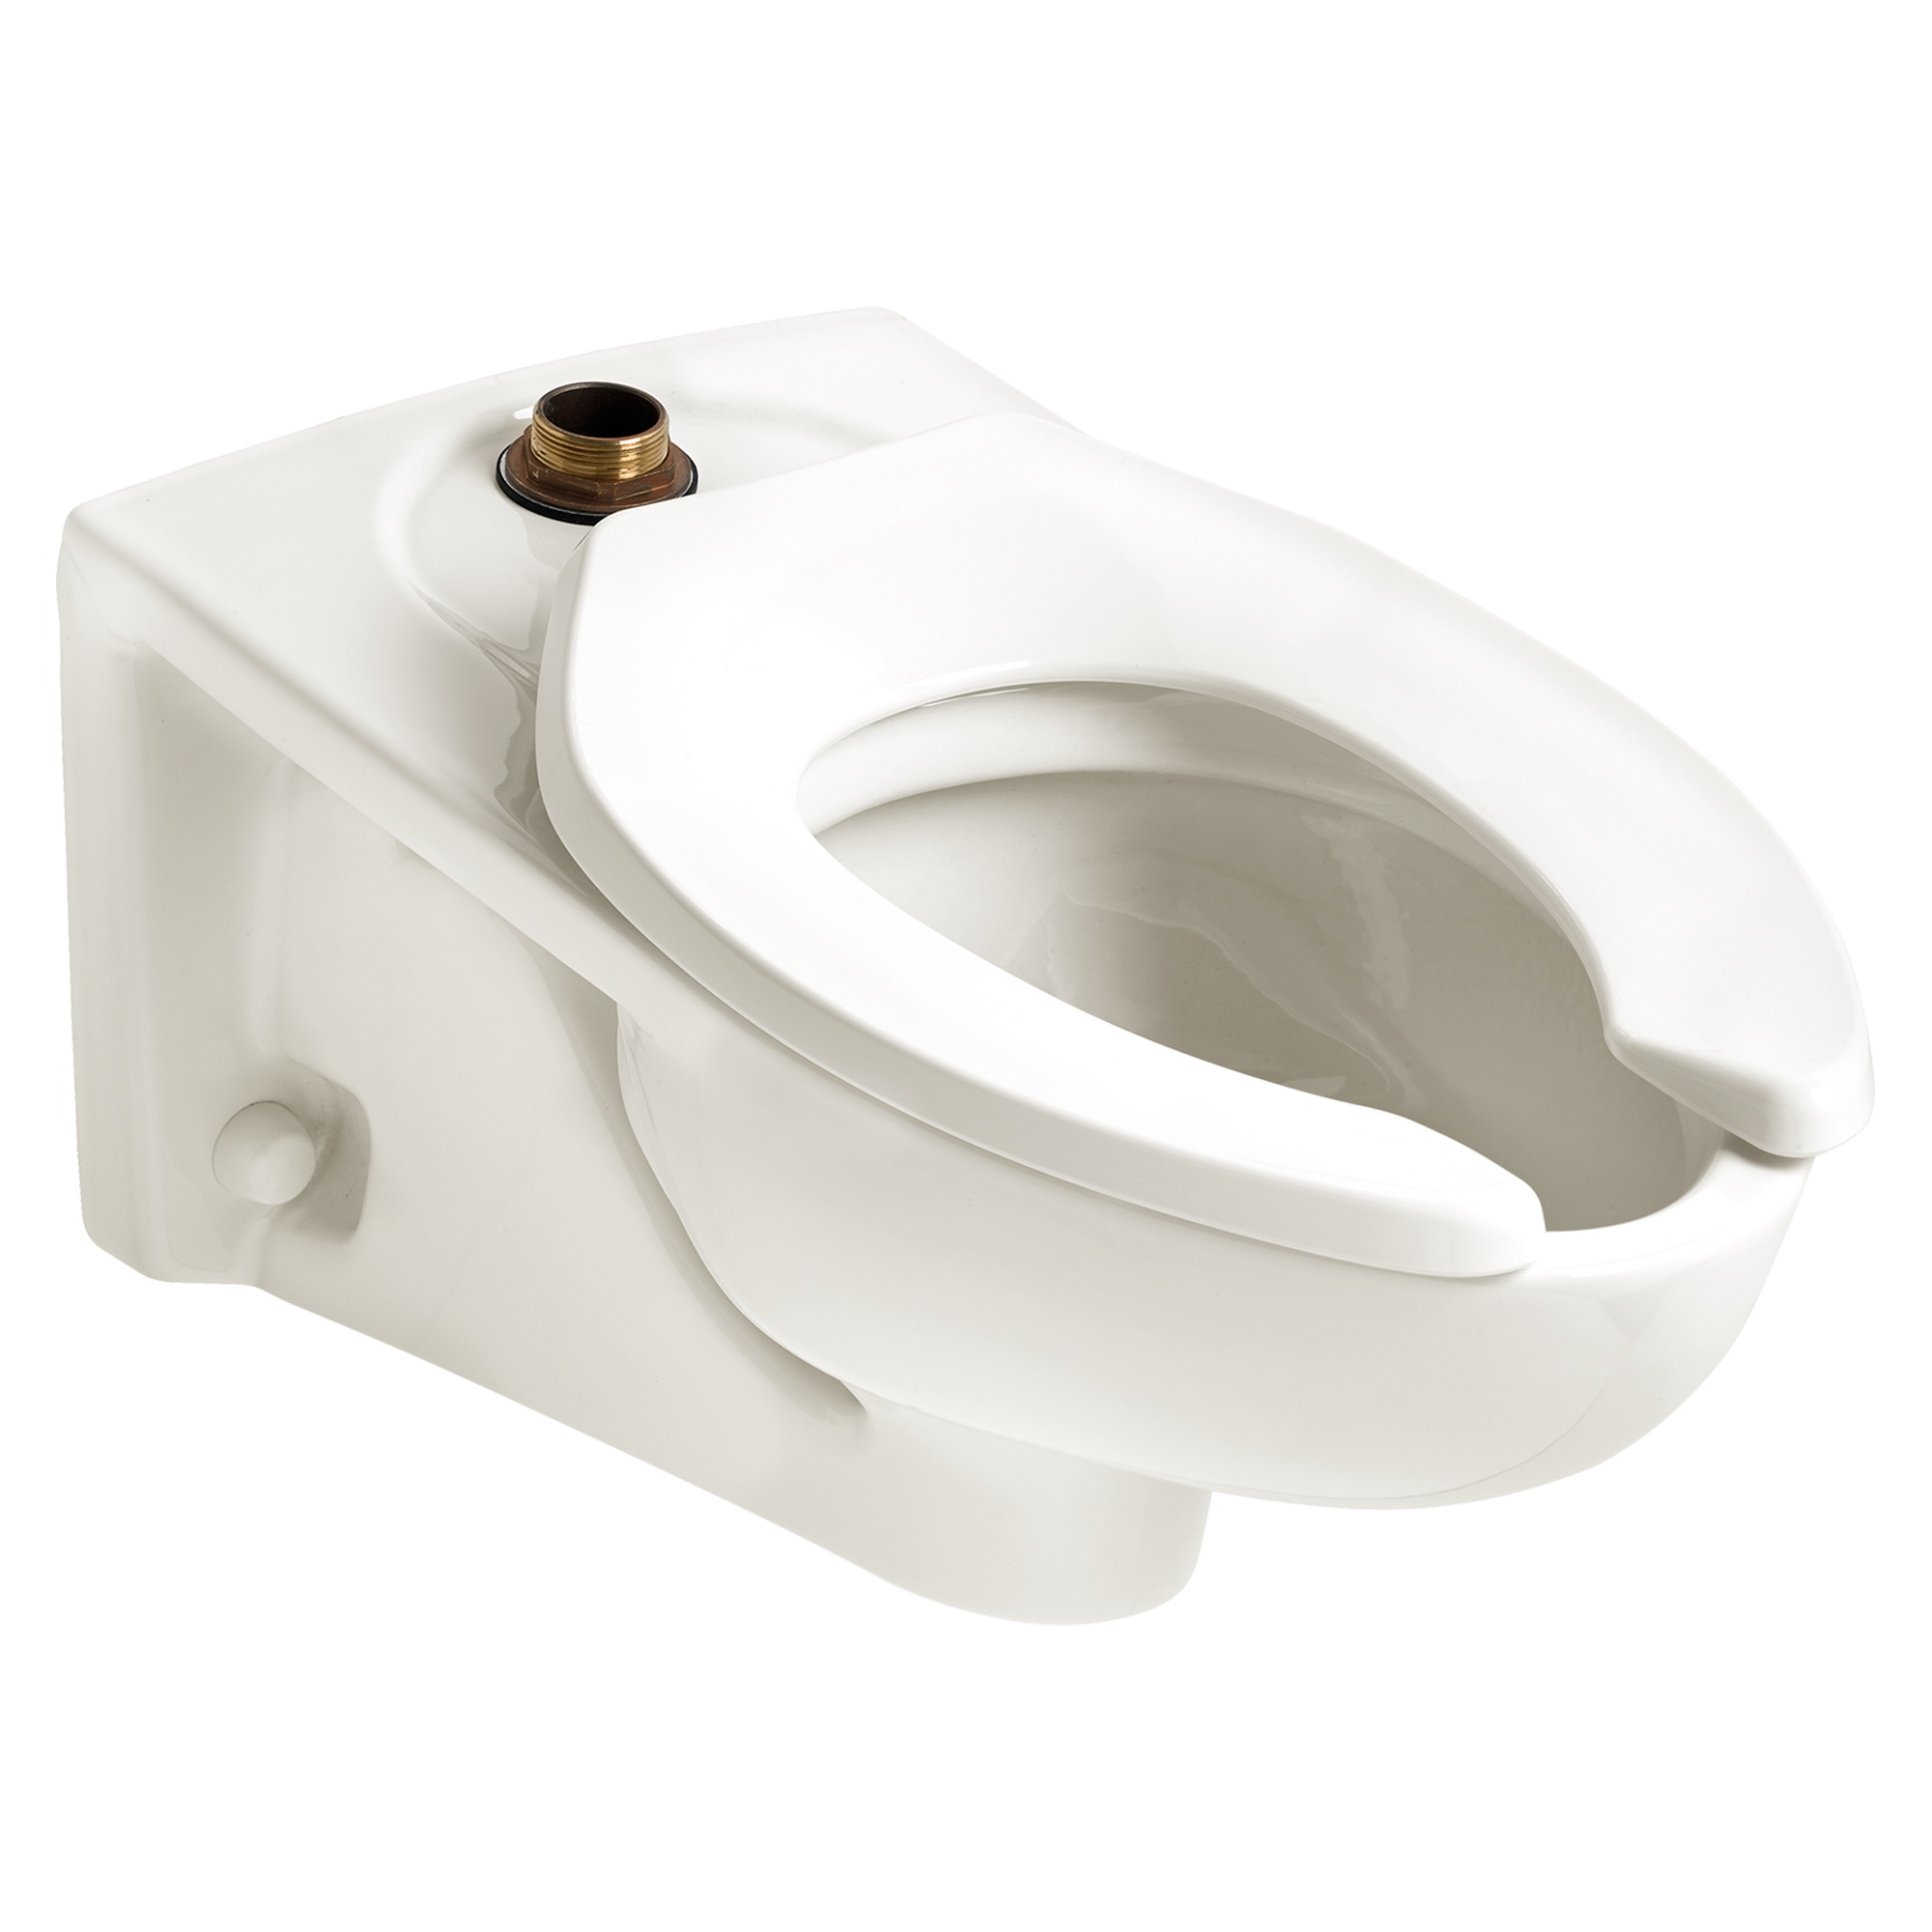 American Standard Afwall® Millennium™ FloWise® 3351.101.020 White Vitreous China Elongated Toilet Bowl, 12 in Rough-In, 1.1 - 1.6 gpf